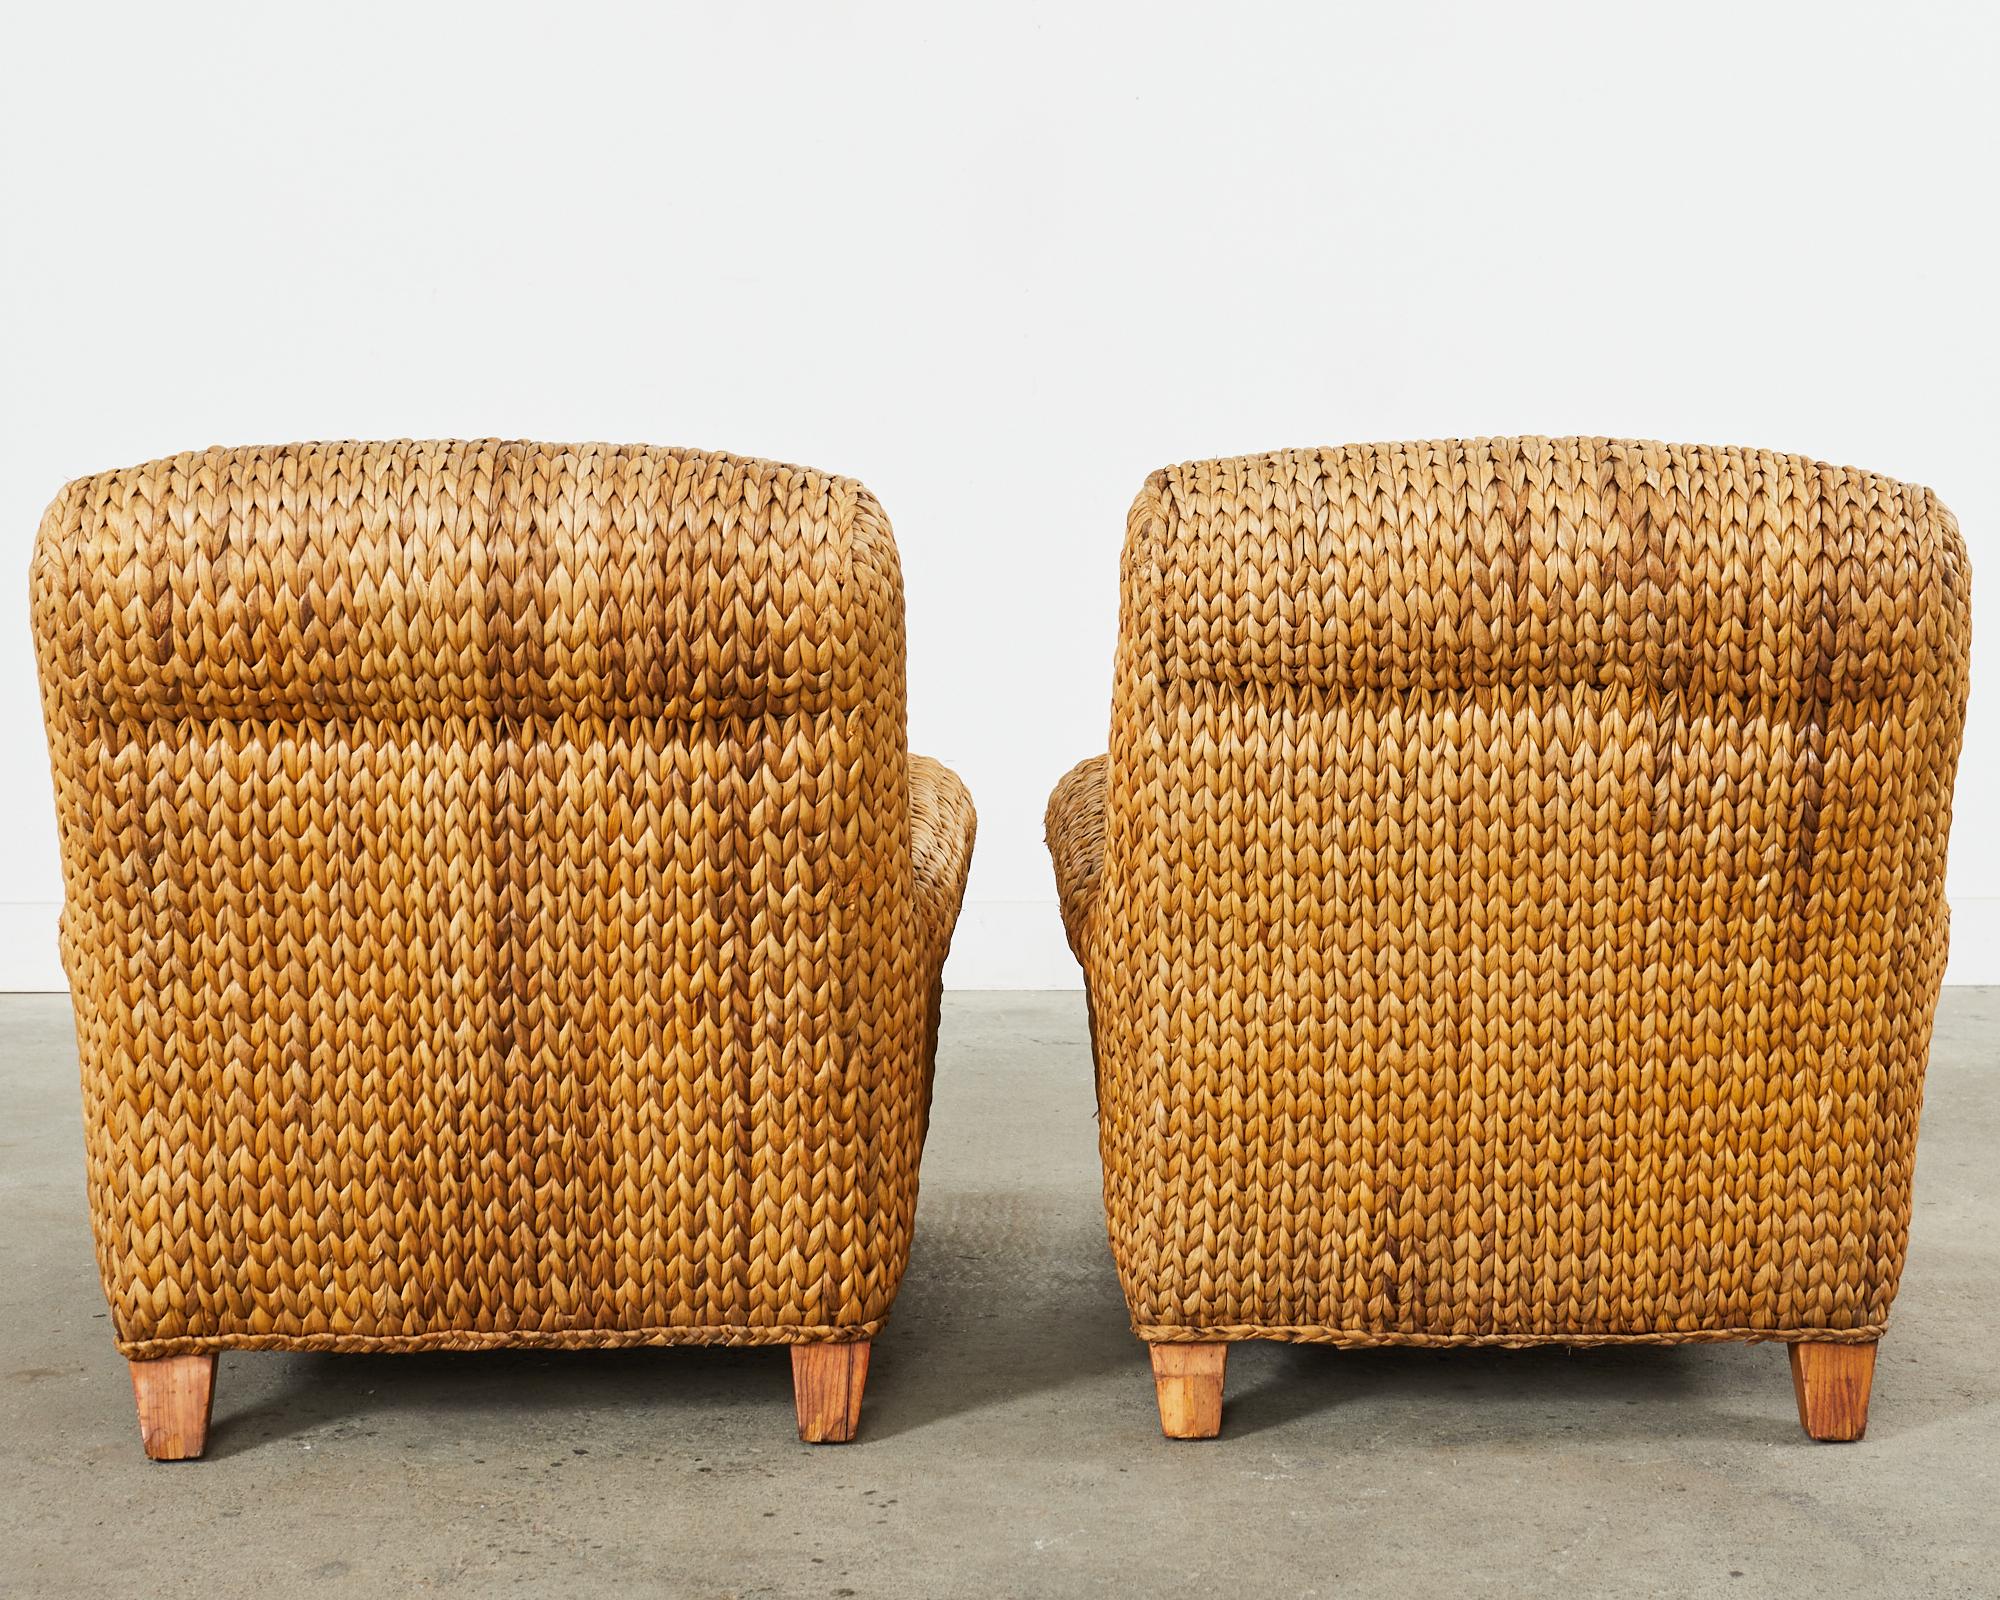 Pair of Ralph Lauren Organic Modern Seagrass Lounge Chairs For Sale 11